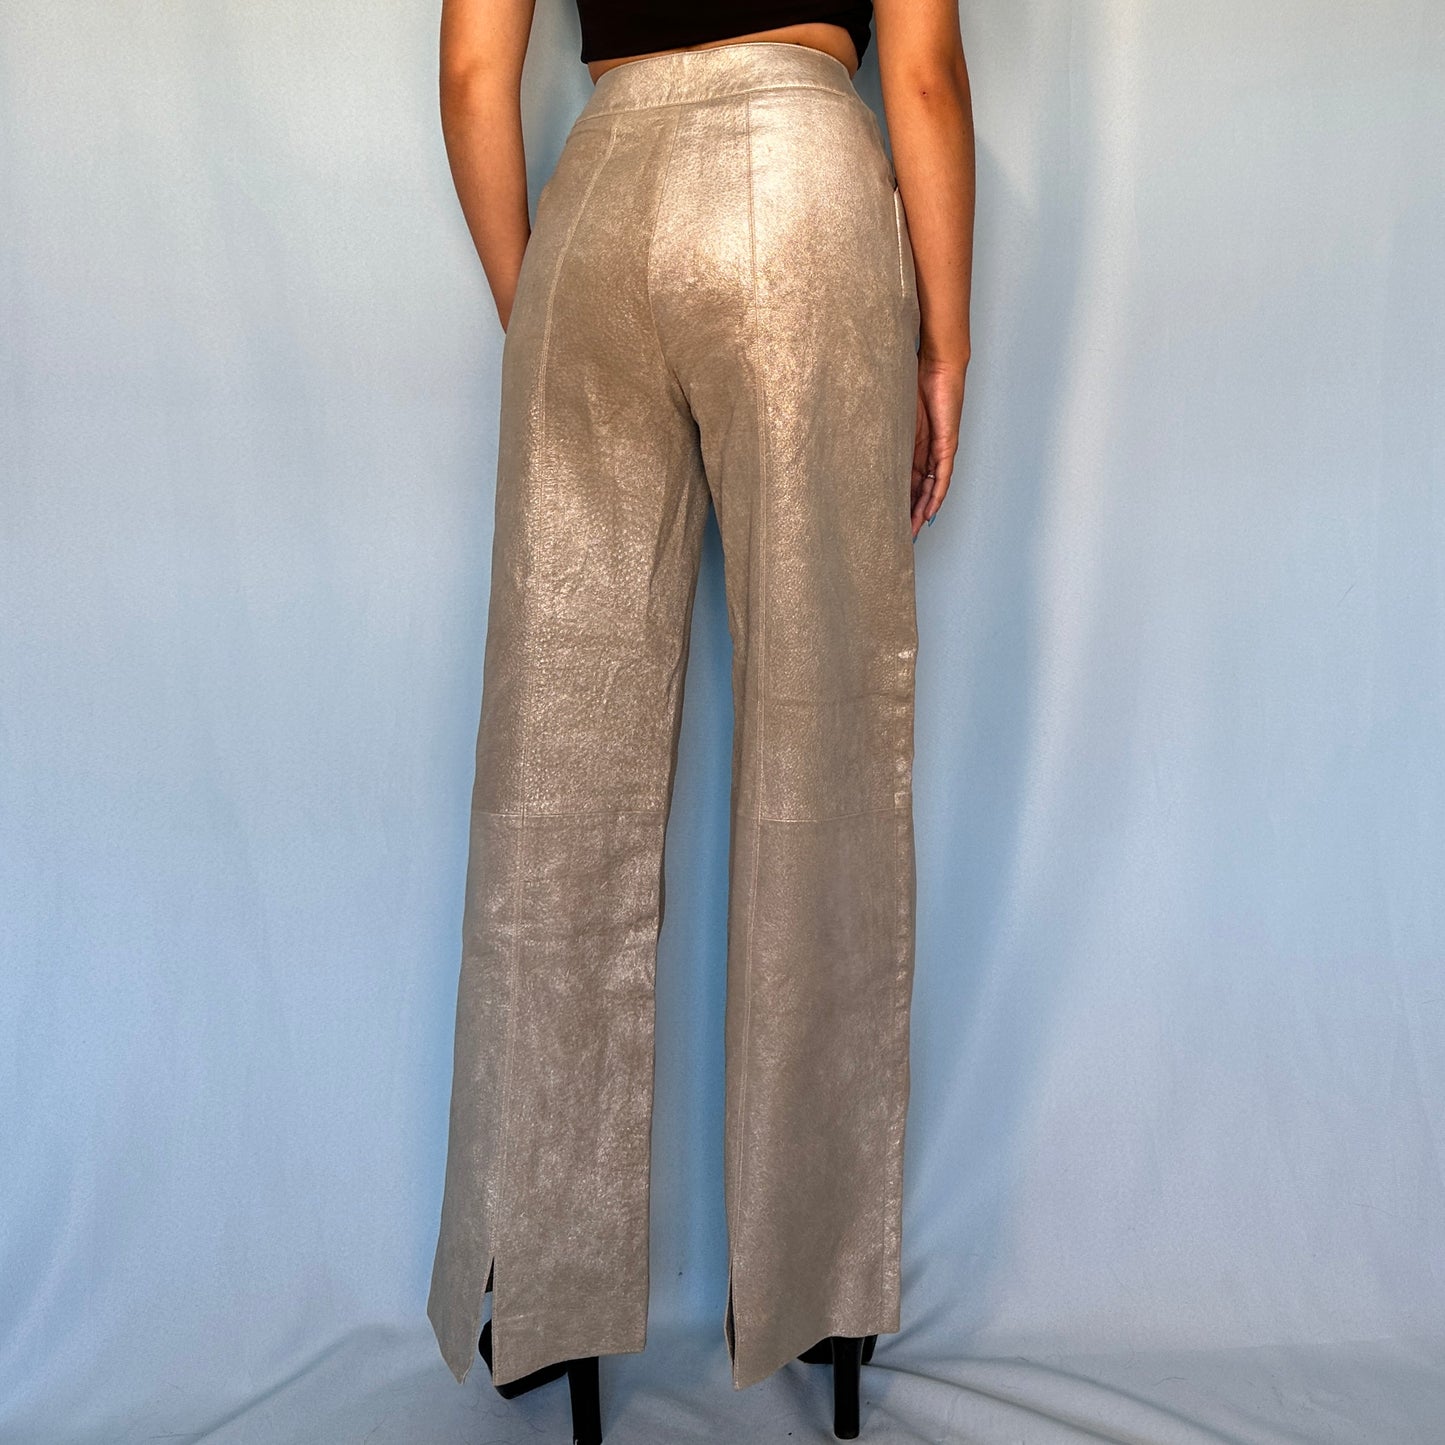 Chanel Fall 1999 Runway Metallic Silver Leather Flared Pants